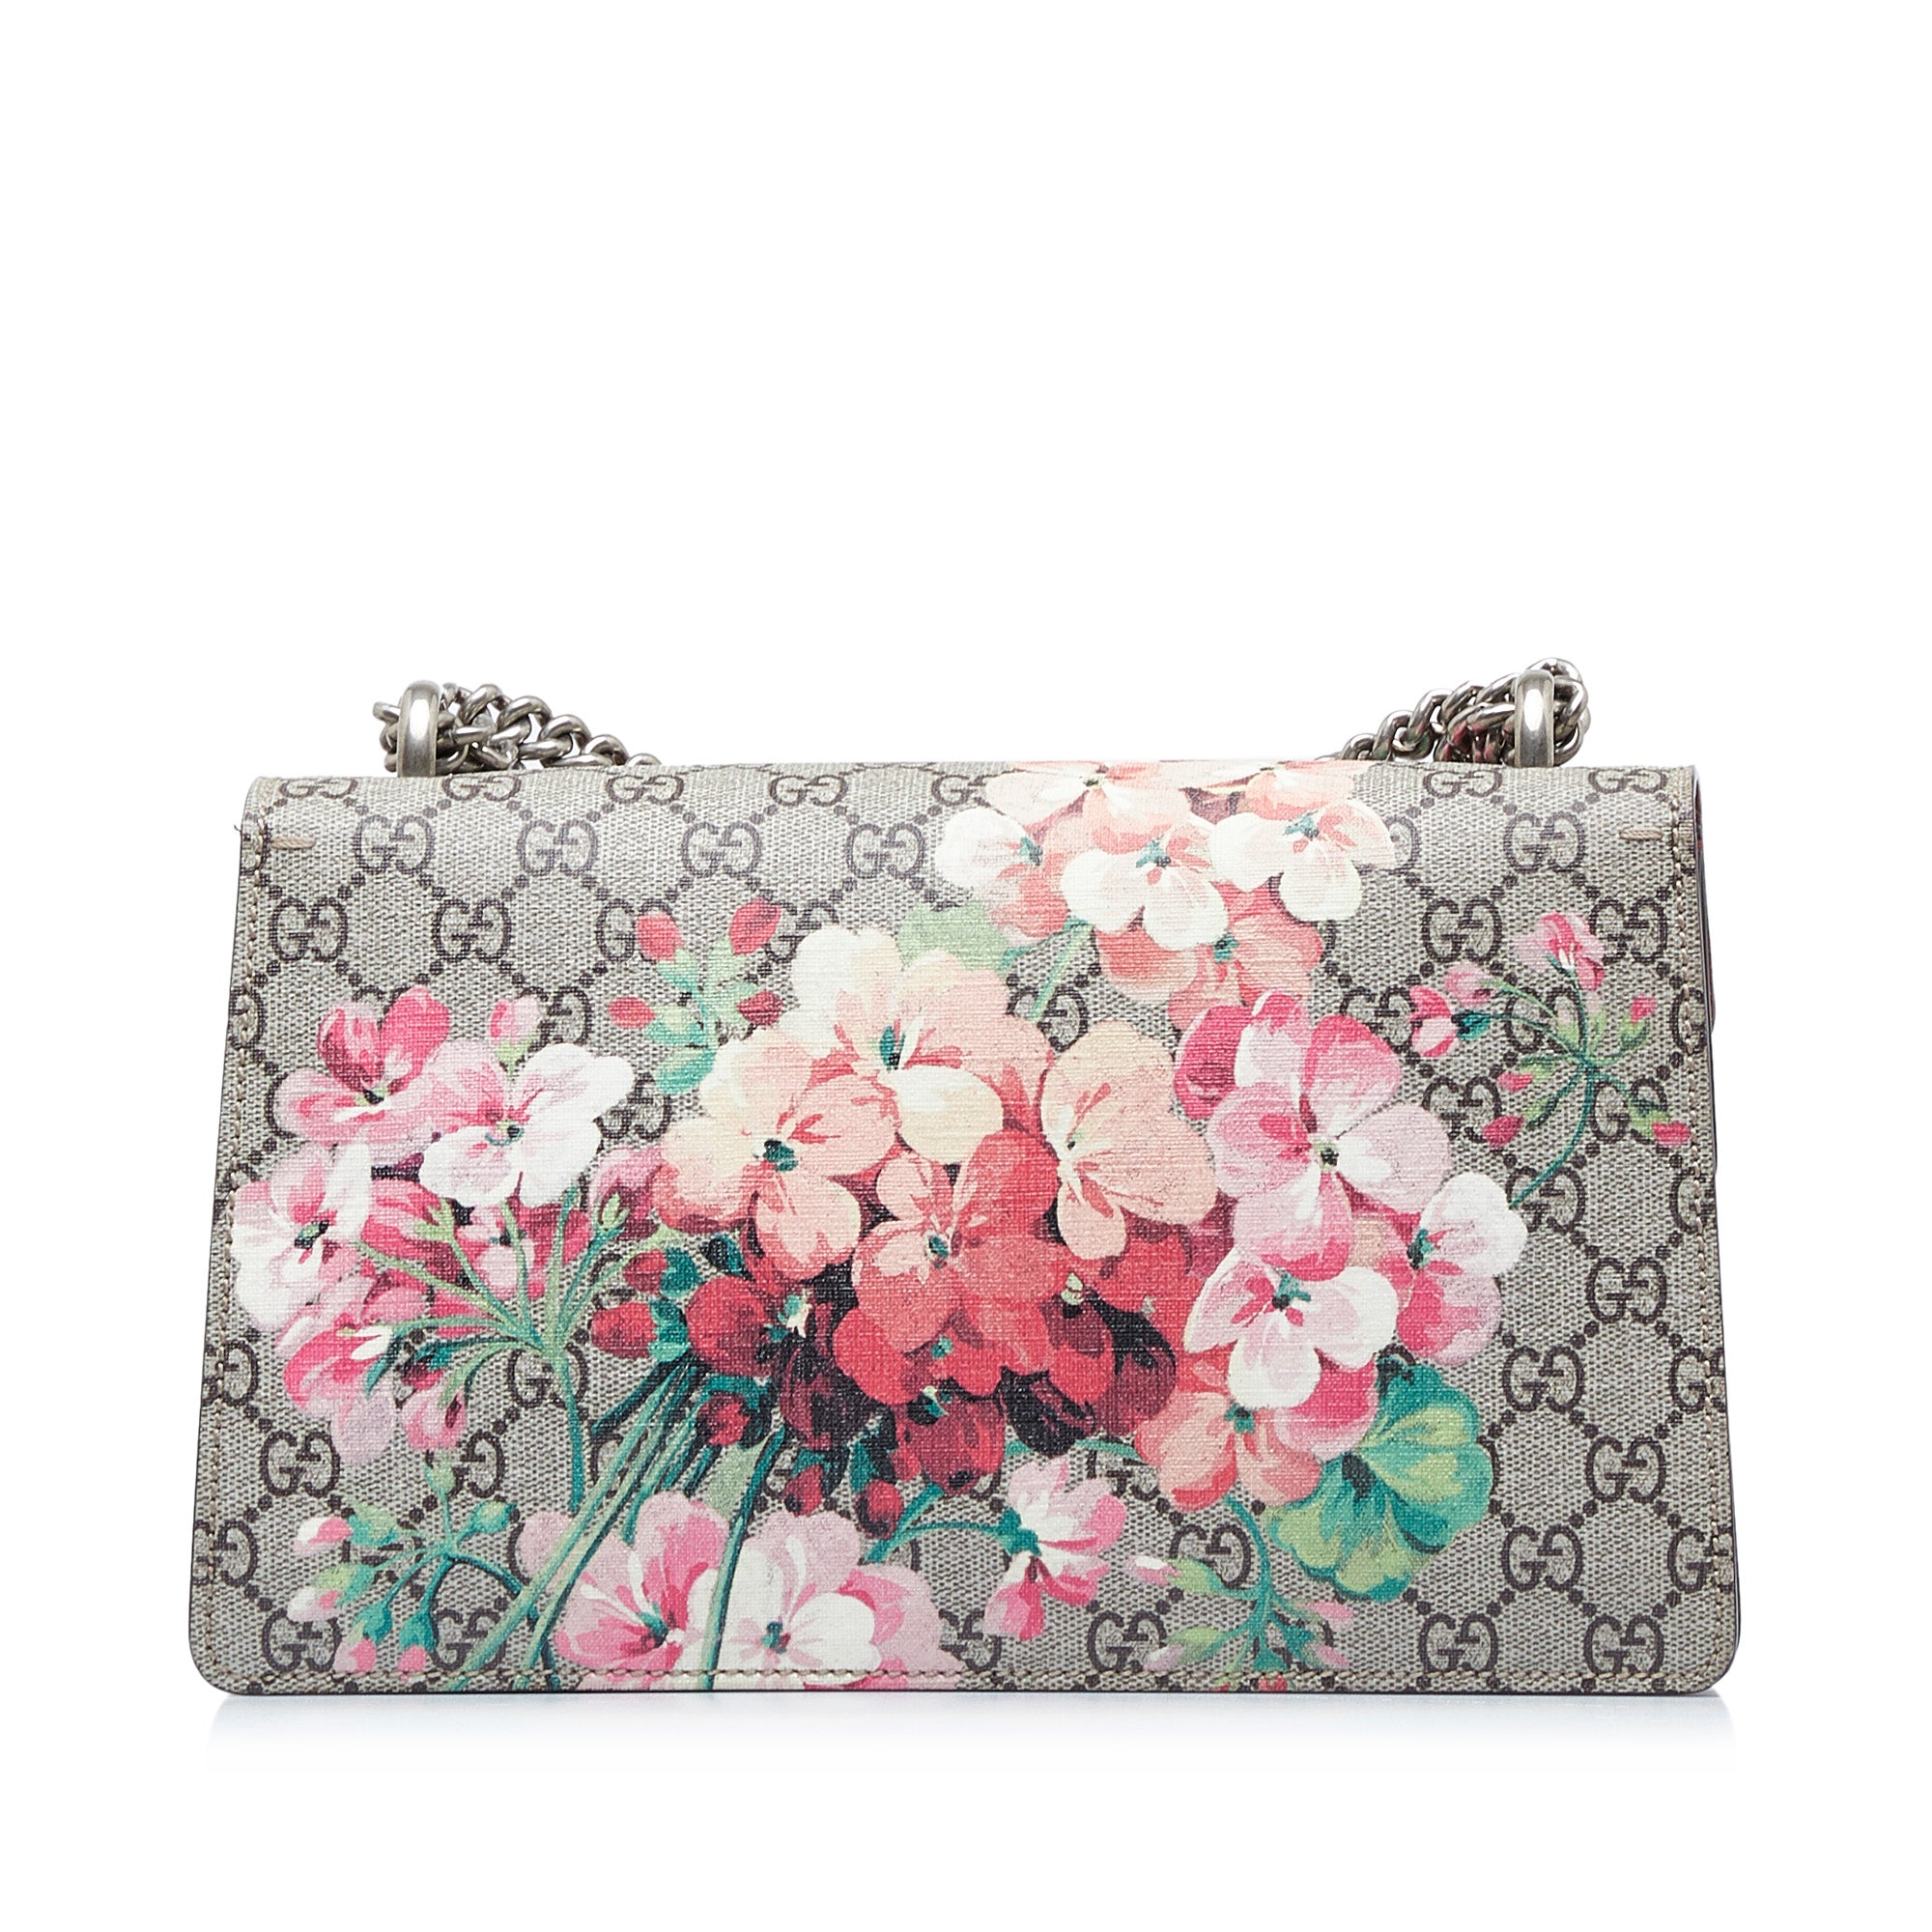 GUCCI Clutch Bag Flat Pouch GG Blooms Floral Pattern Multicolor